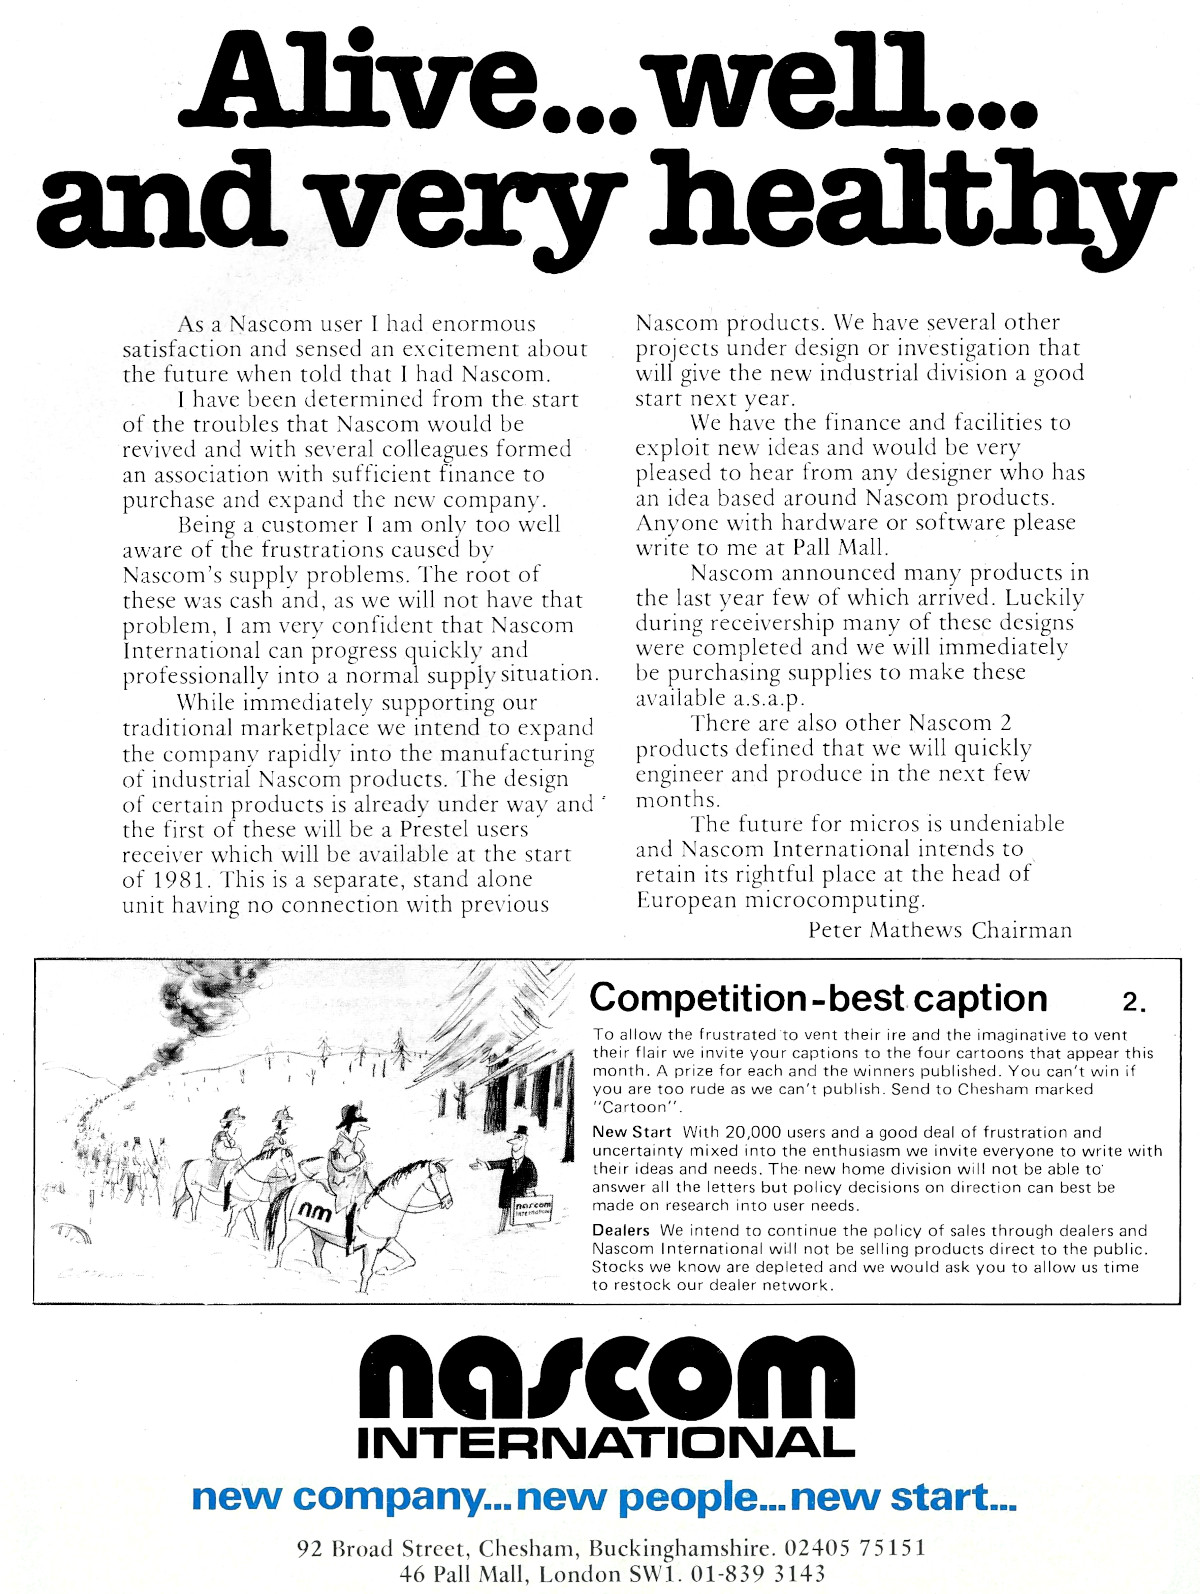 Nascom has a bit of a re-launch towards the end of 1980, with a slight rebrand to <span class='hilite'>Nascom International</span>.  From Personal Computer World, December 1980